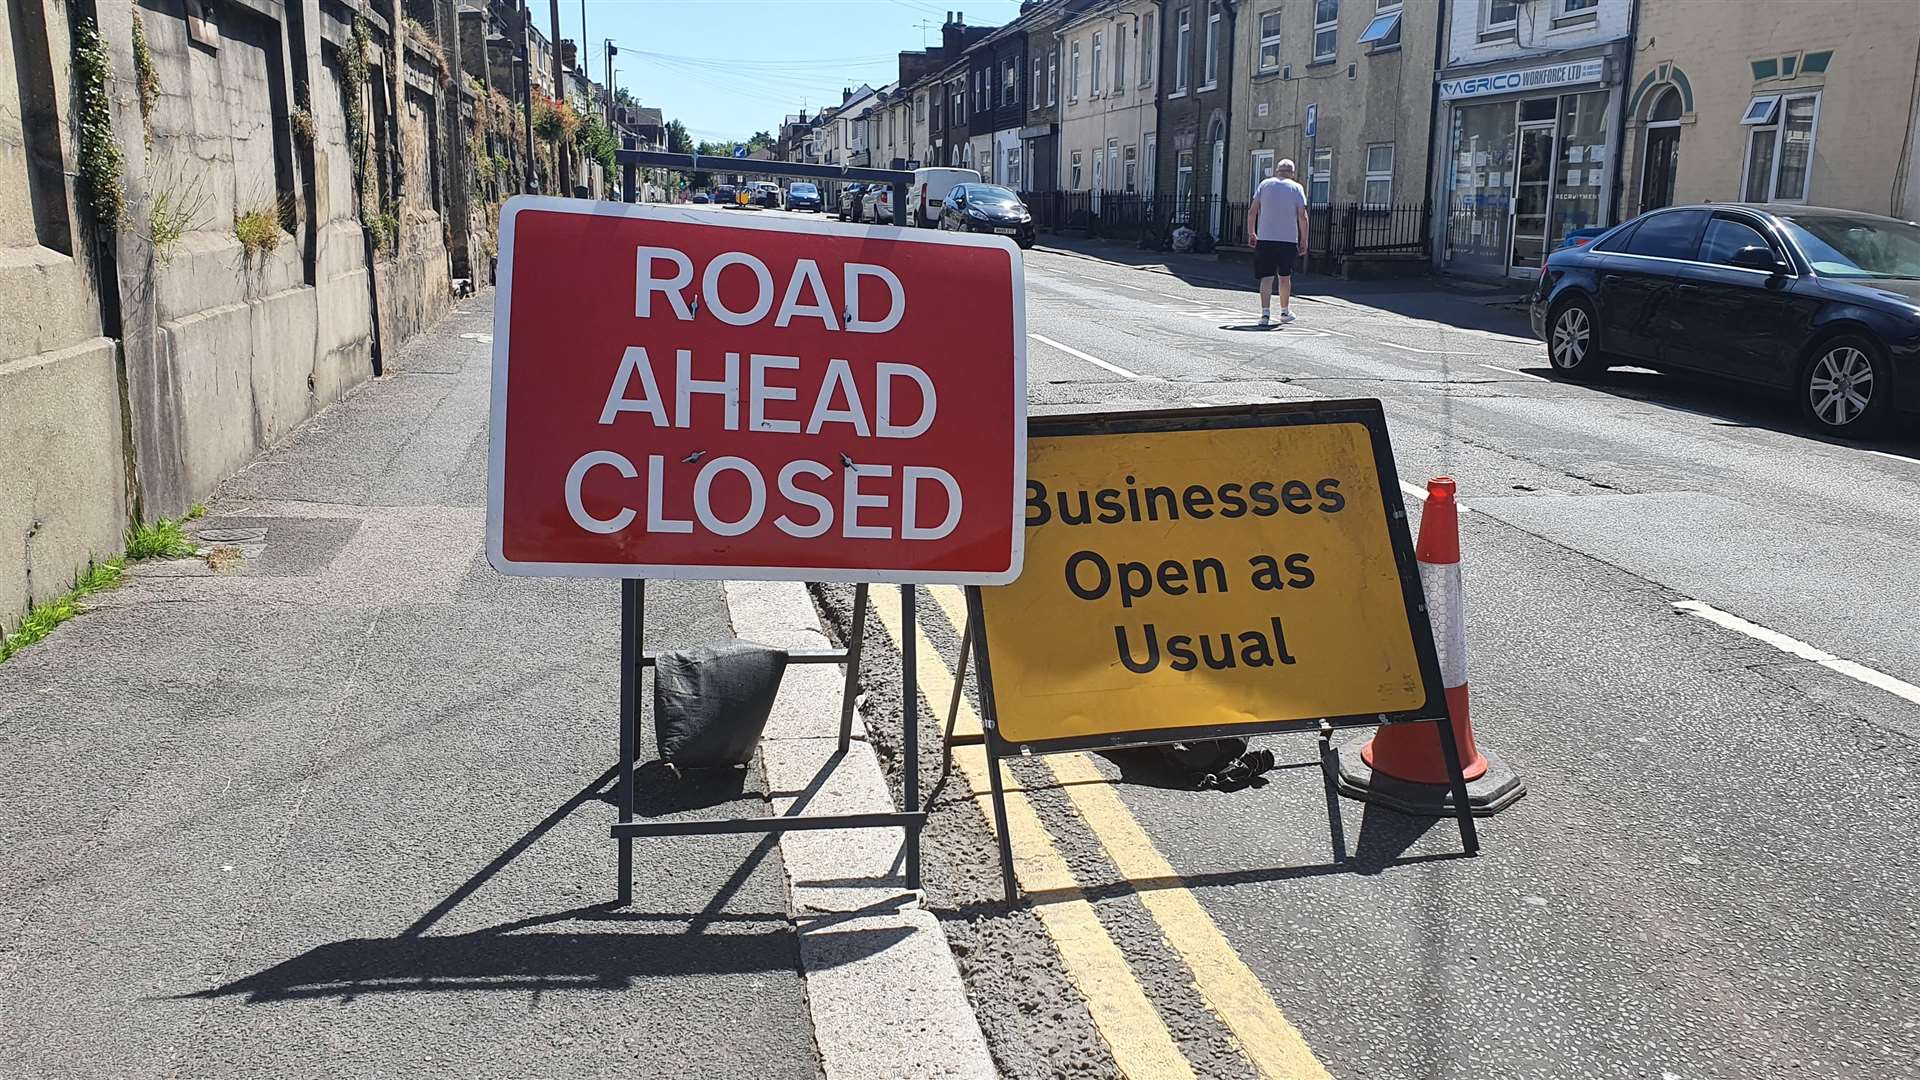 The only sign saying businesses are open is half a mile away from the closure and there are several 'road closed' signs in between